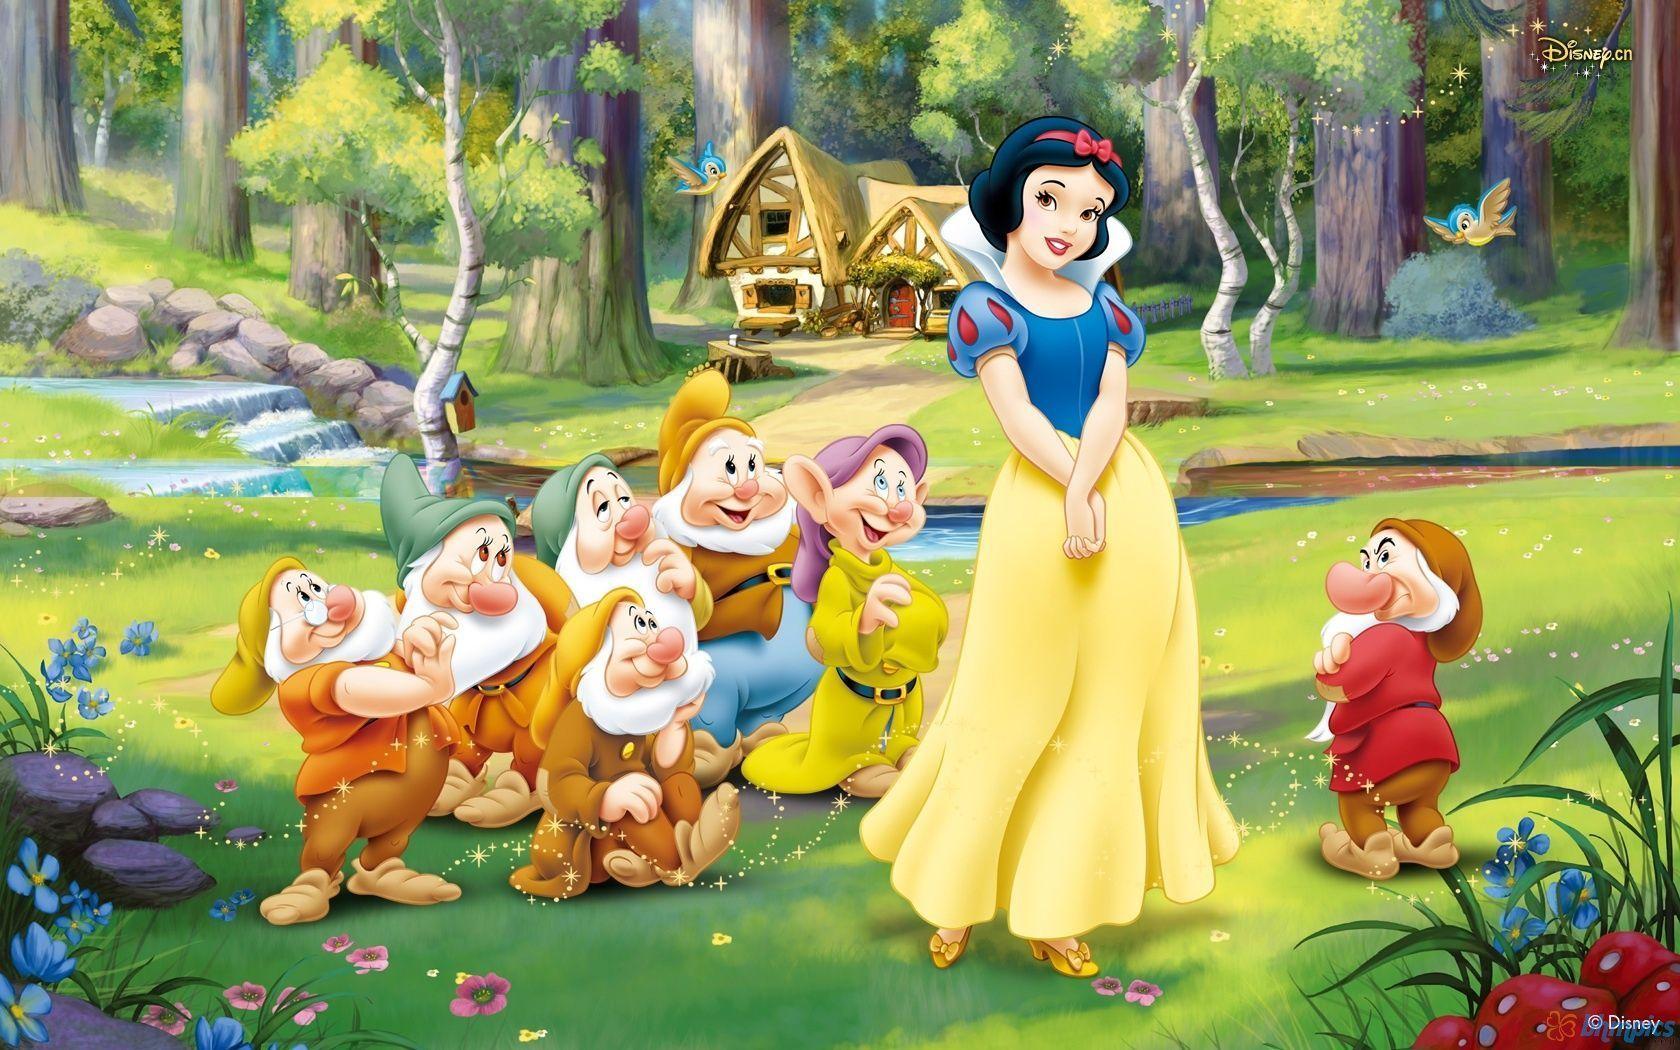 Tigers, Snow White & the Seven Dwarfs, High Heels and Other